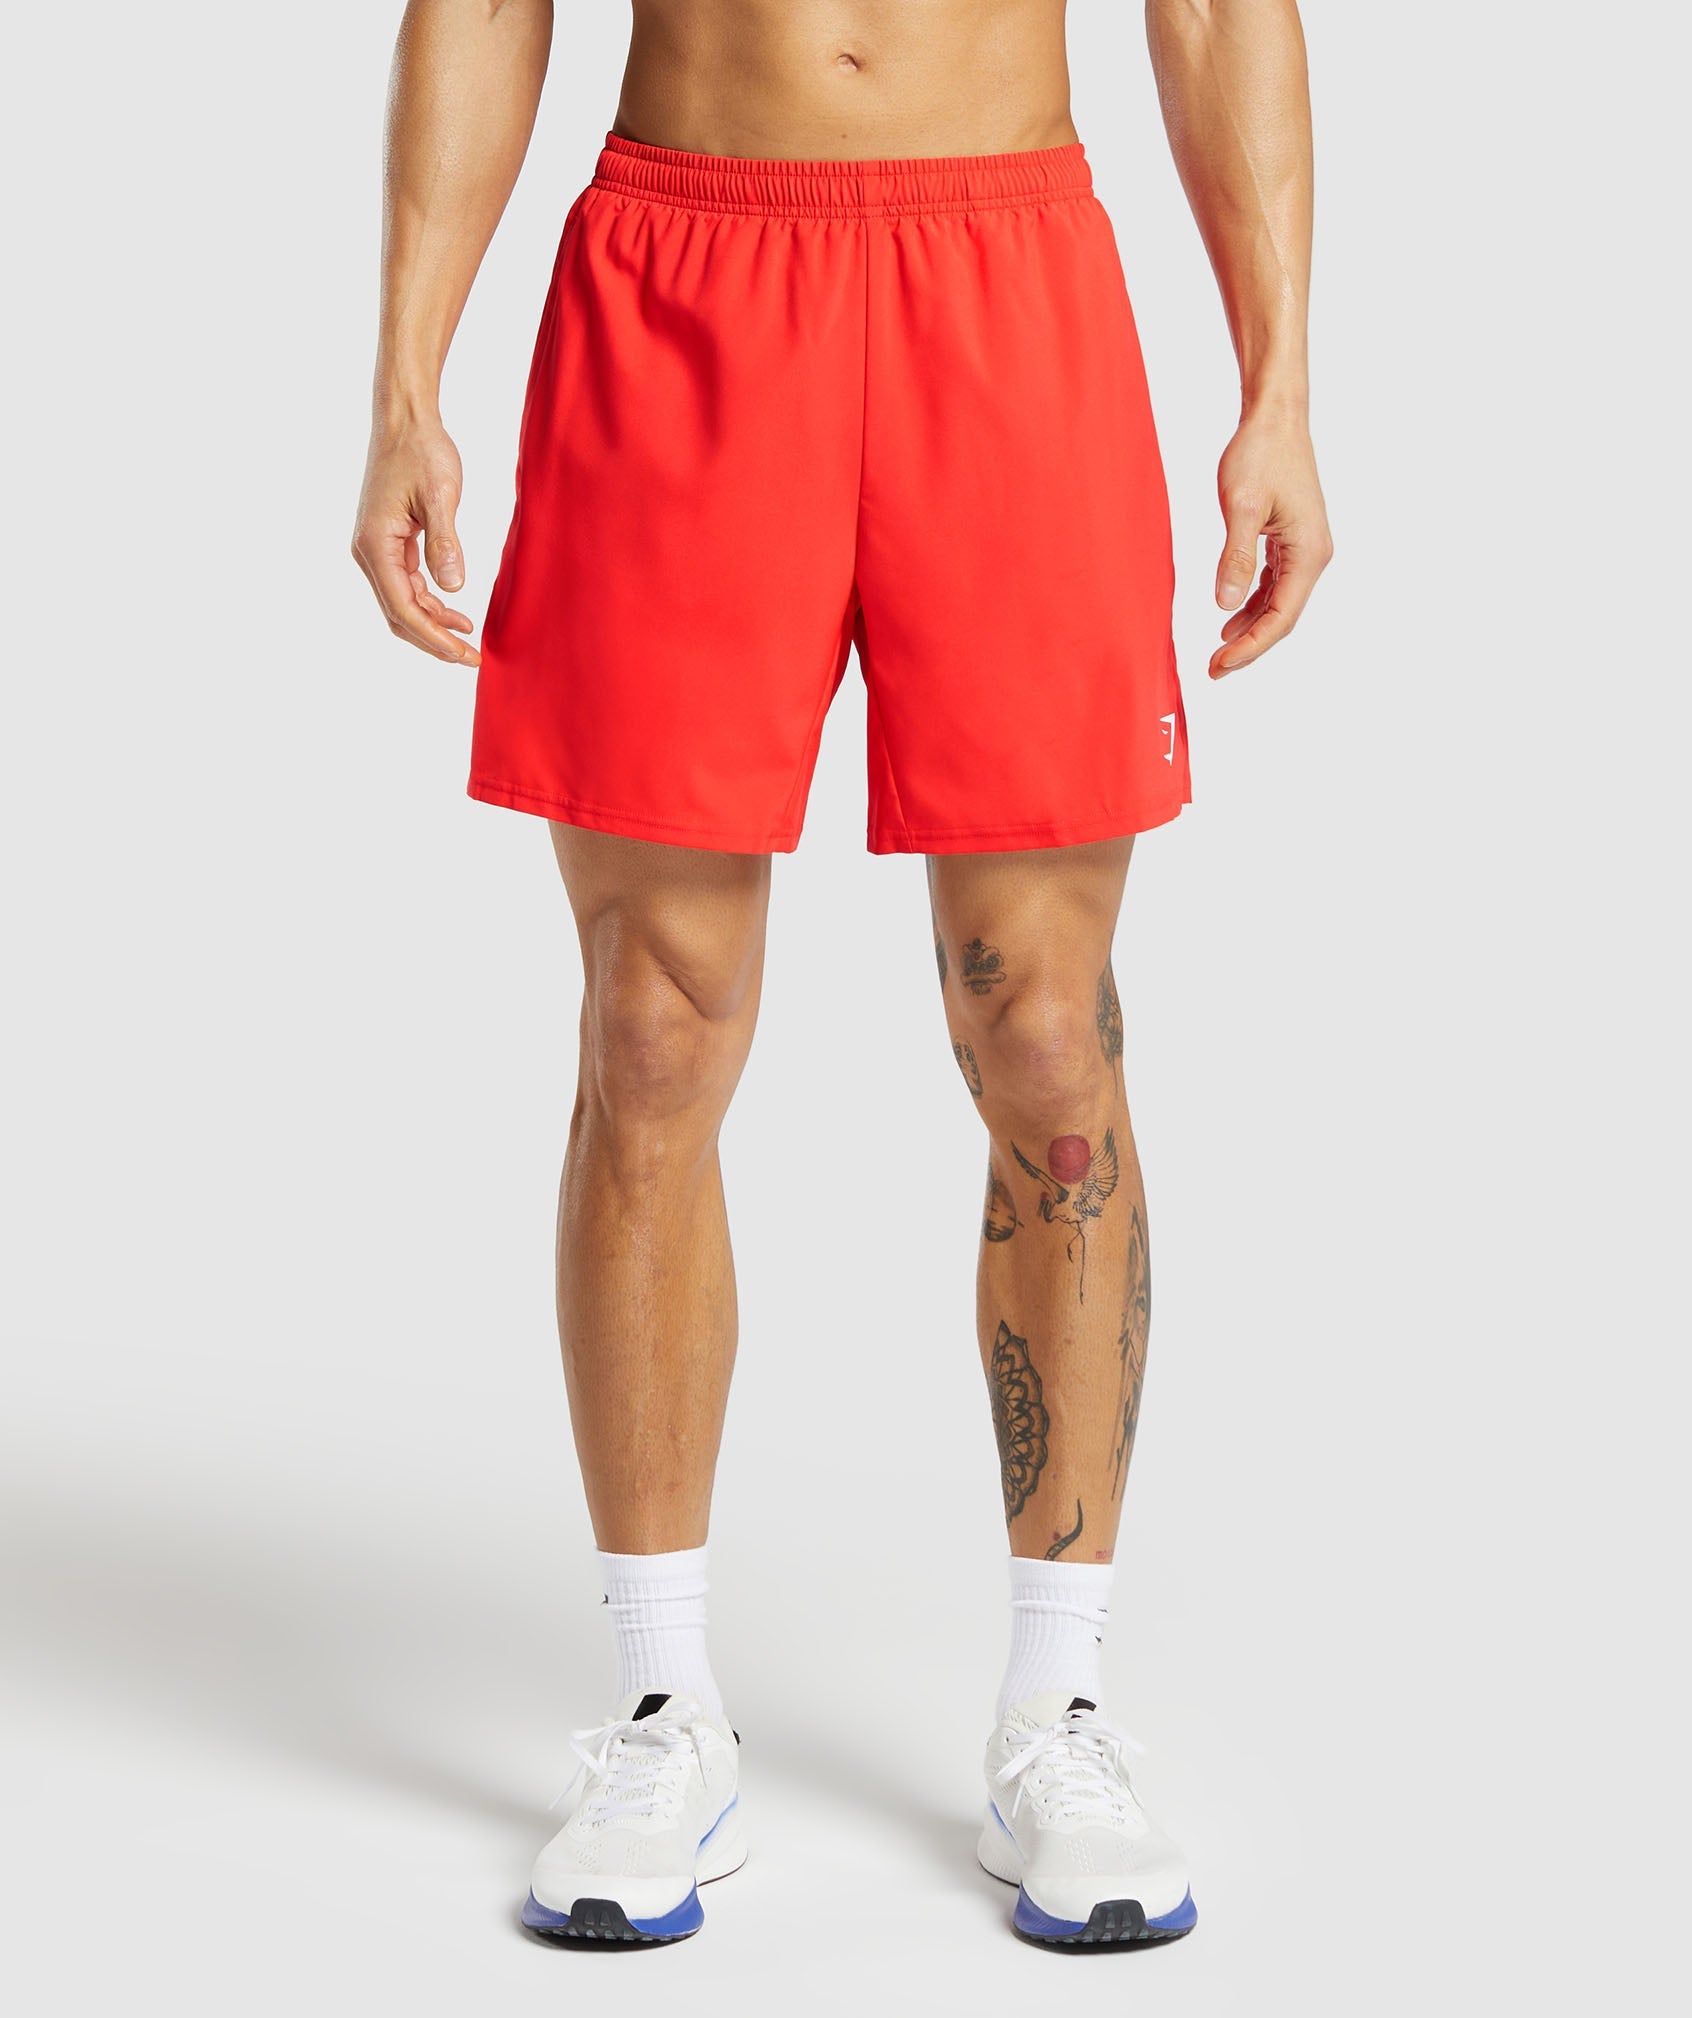 Arrival 7" Shorts in Pow Red